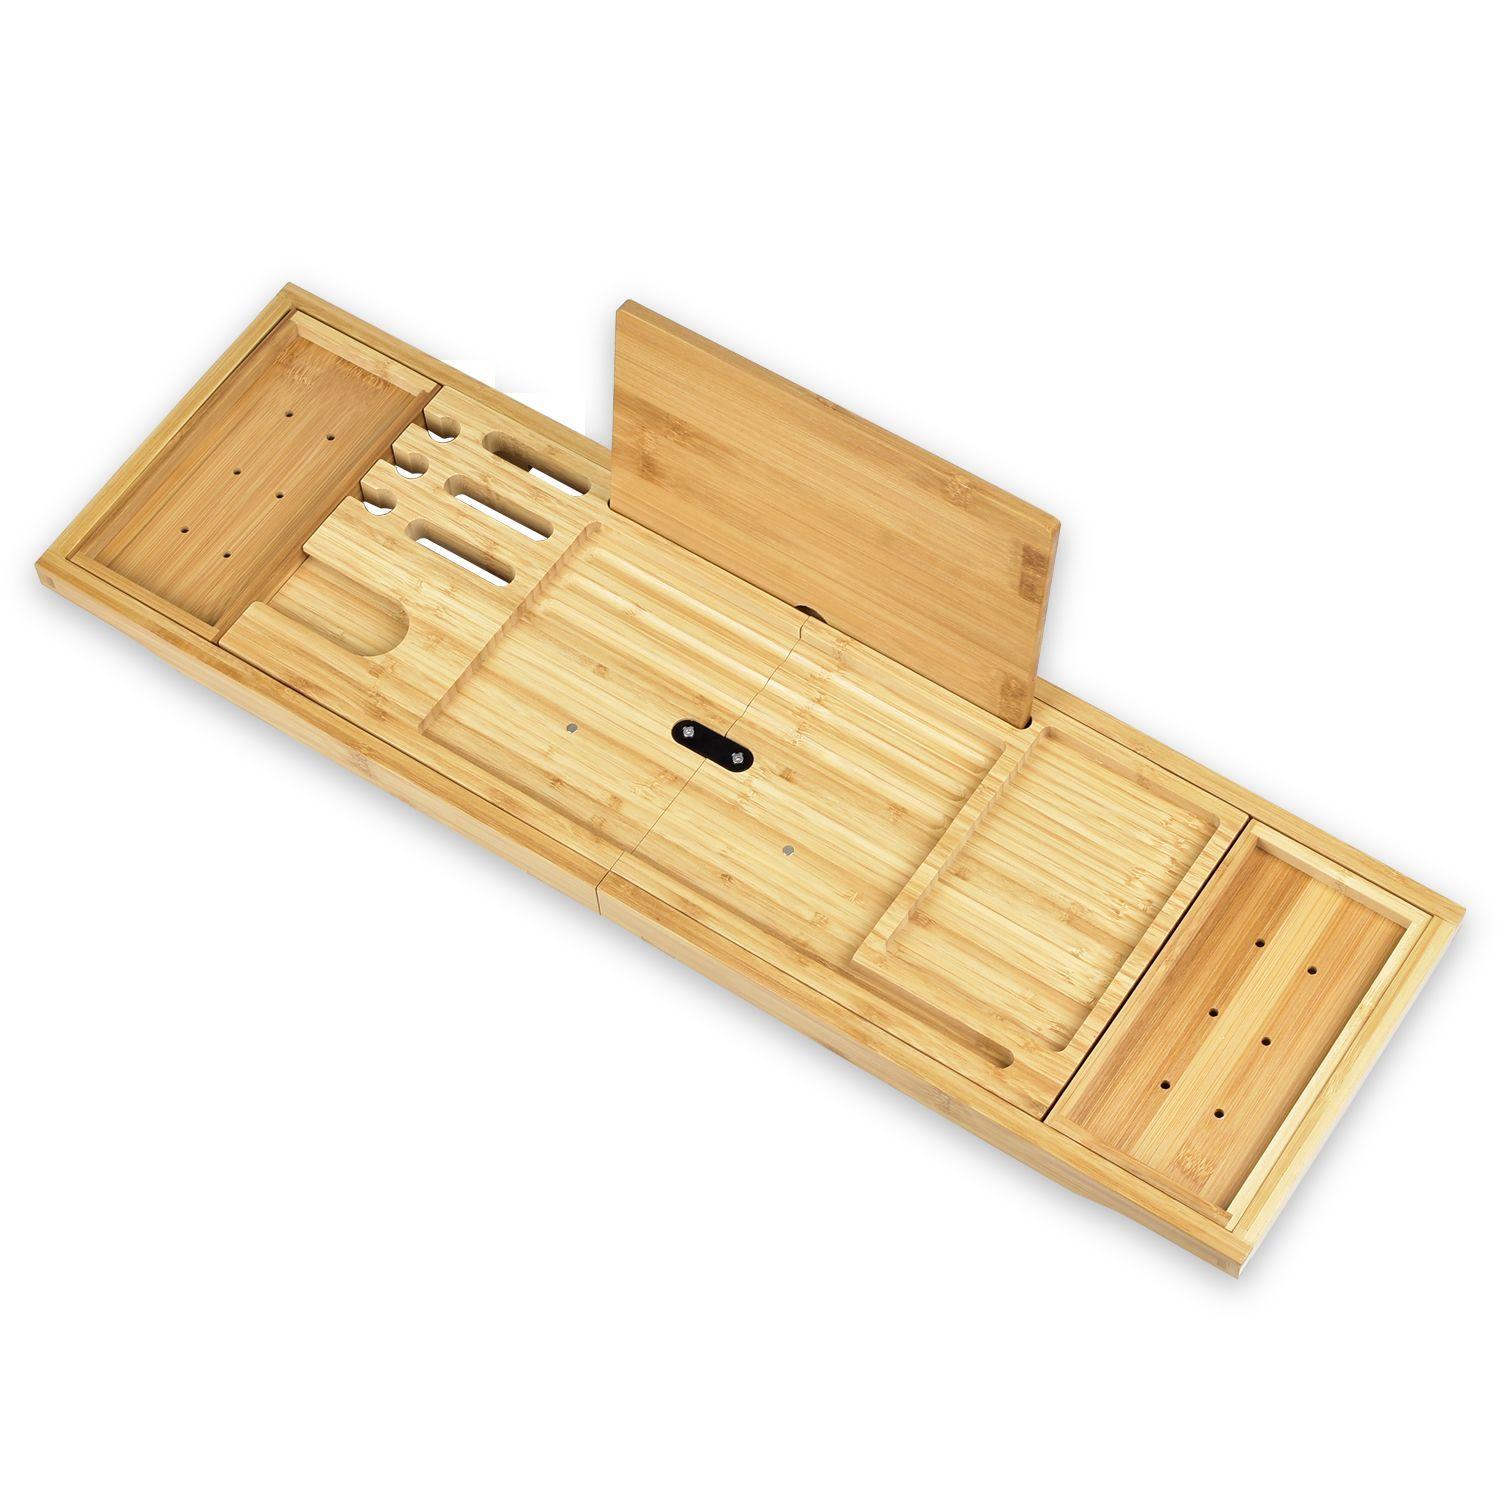 Bamboo bath tray for bathtub with wine glass holder and place for laptop / Bathroom shelf for bathtub - foldable